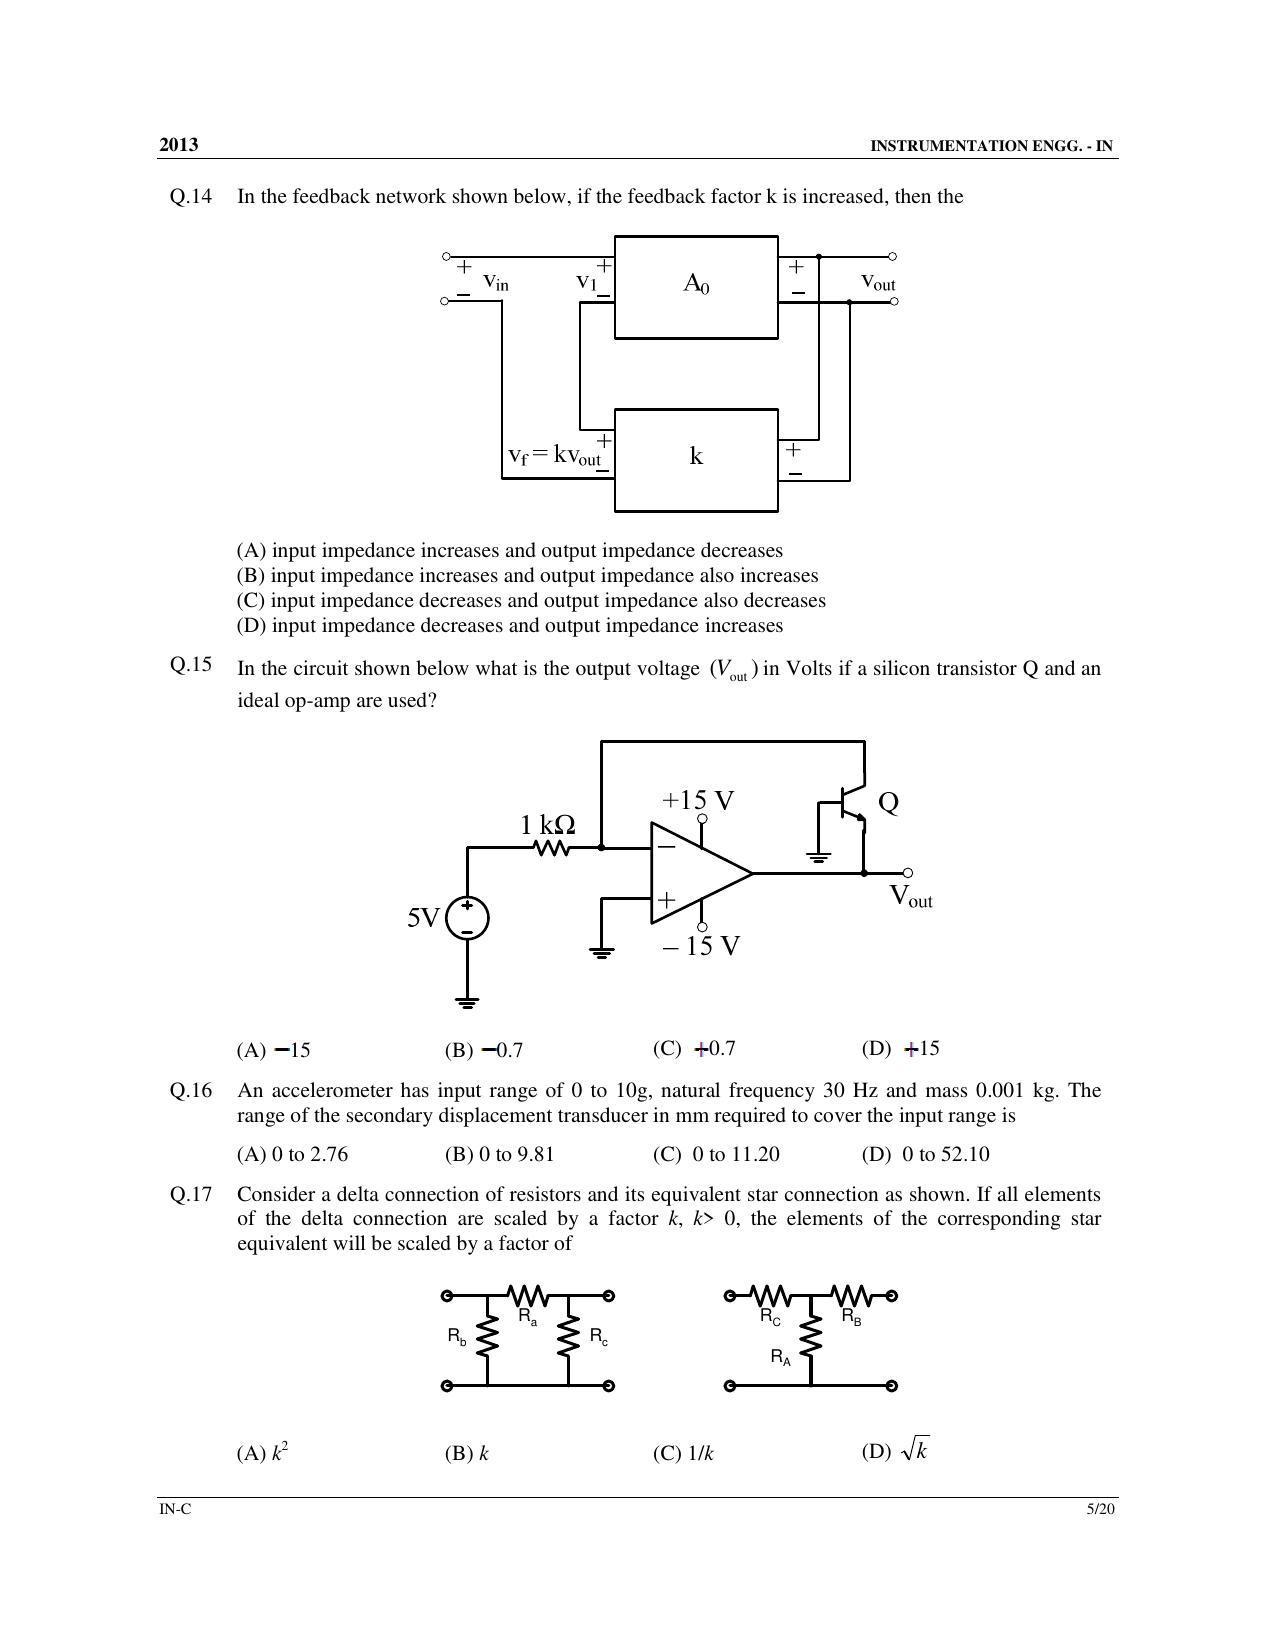 GATE 2013 Instrumentation Engineering (IN) Question Paper with Answer Key - Page 40